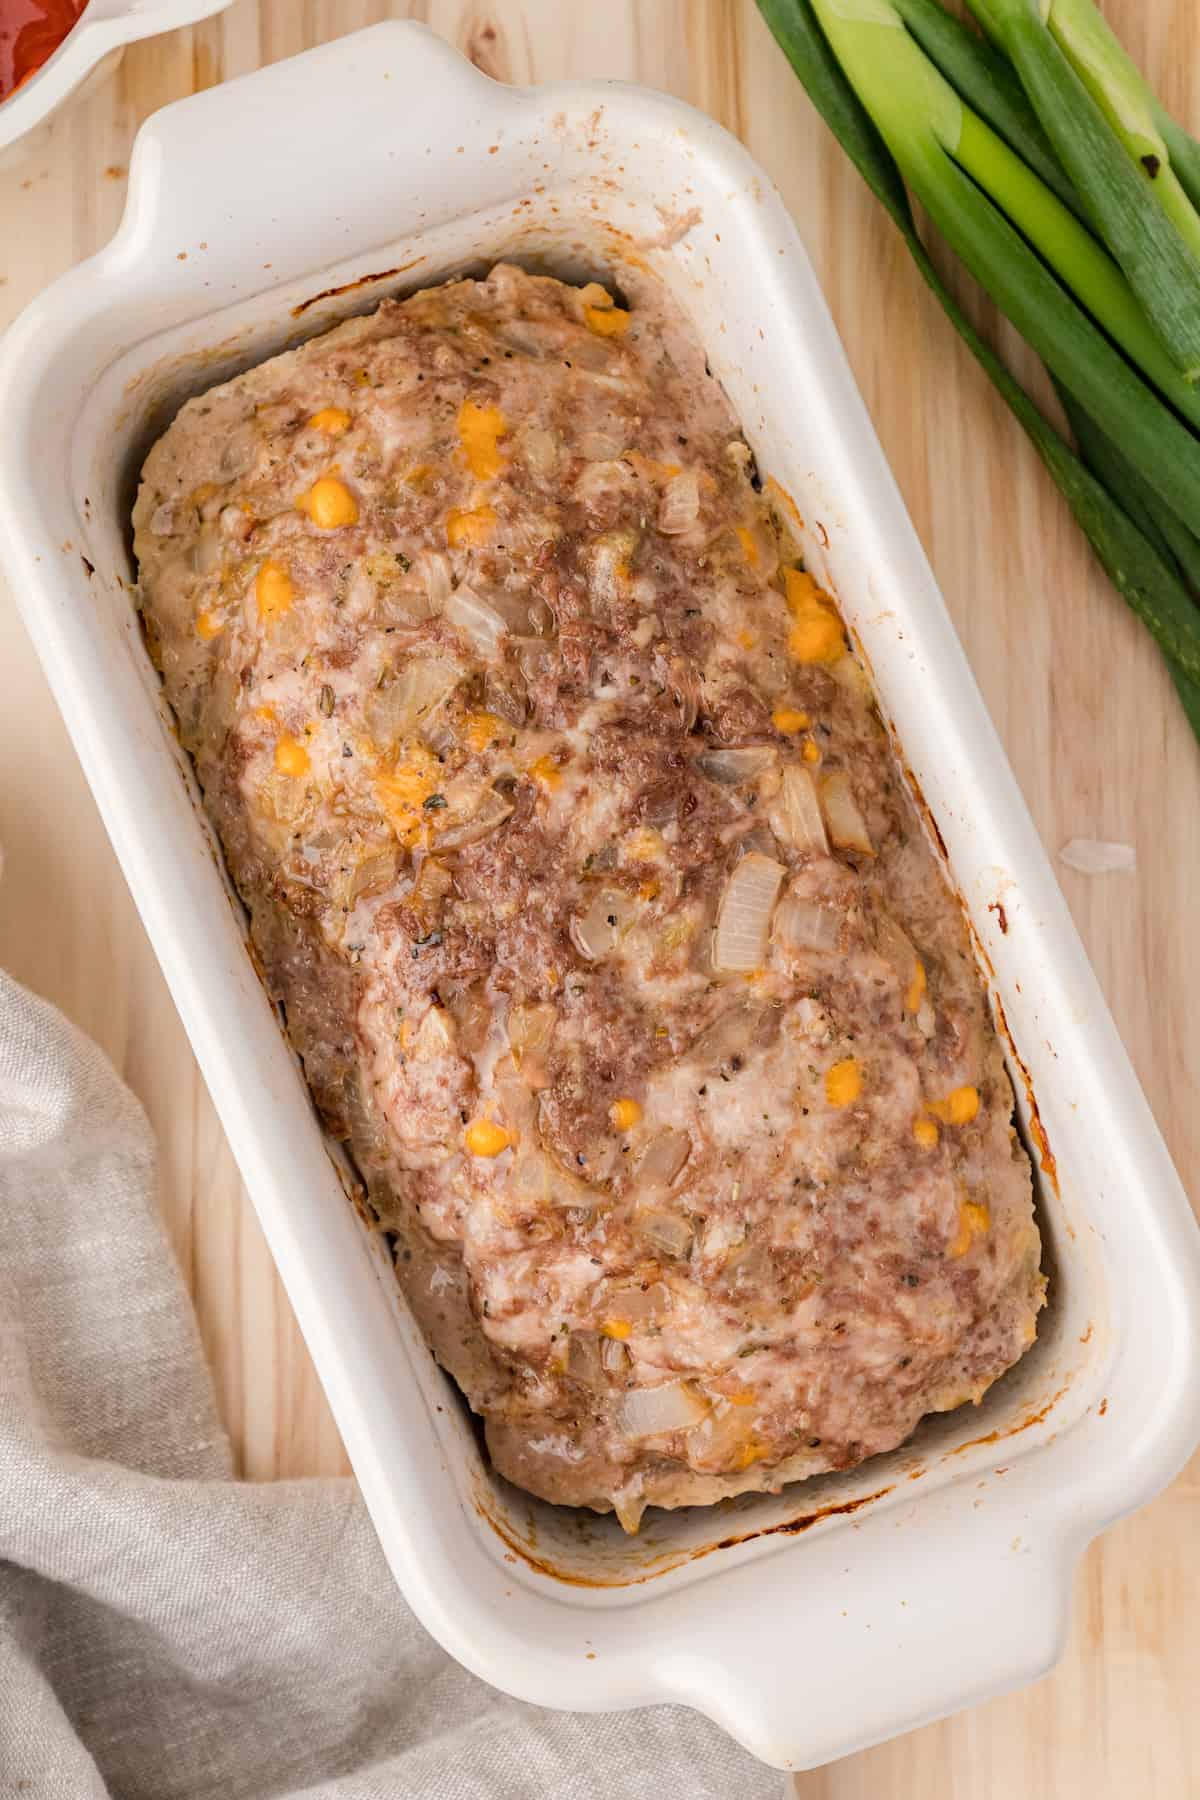 easy healthy meatloaf just out of the oven, before brushing on the ketchup mixture